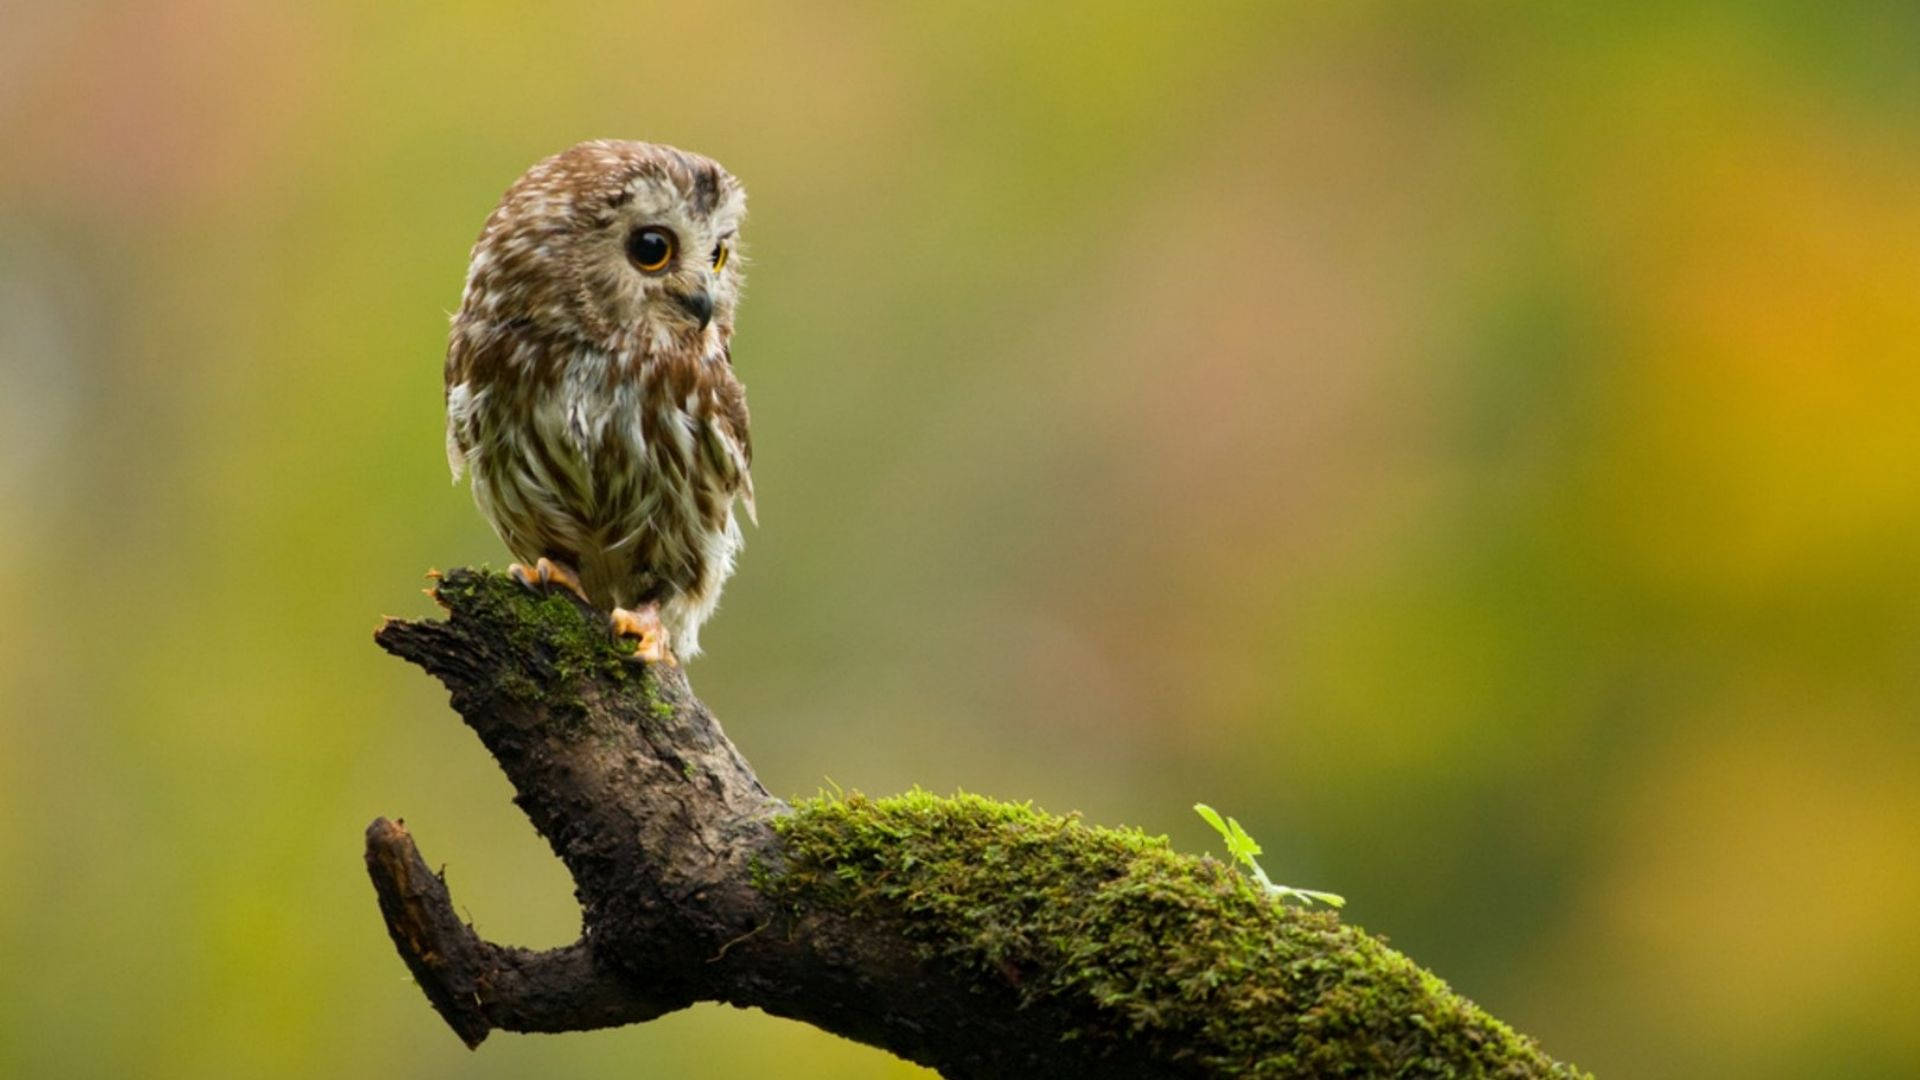 Baby Owl On A Wooden Stick Background